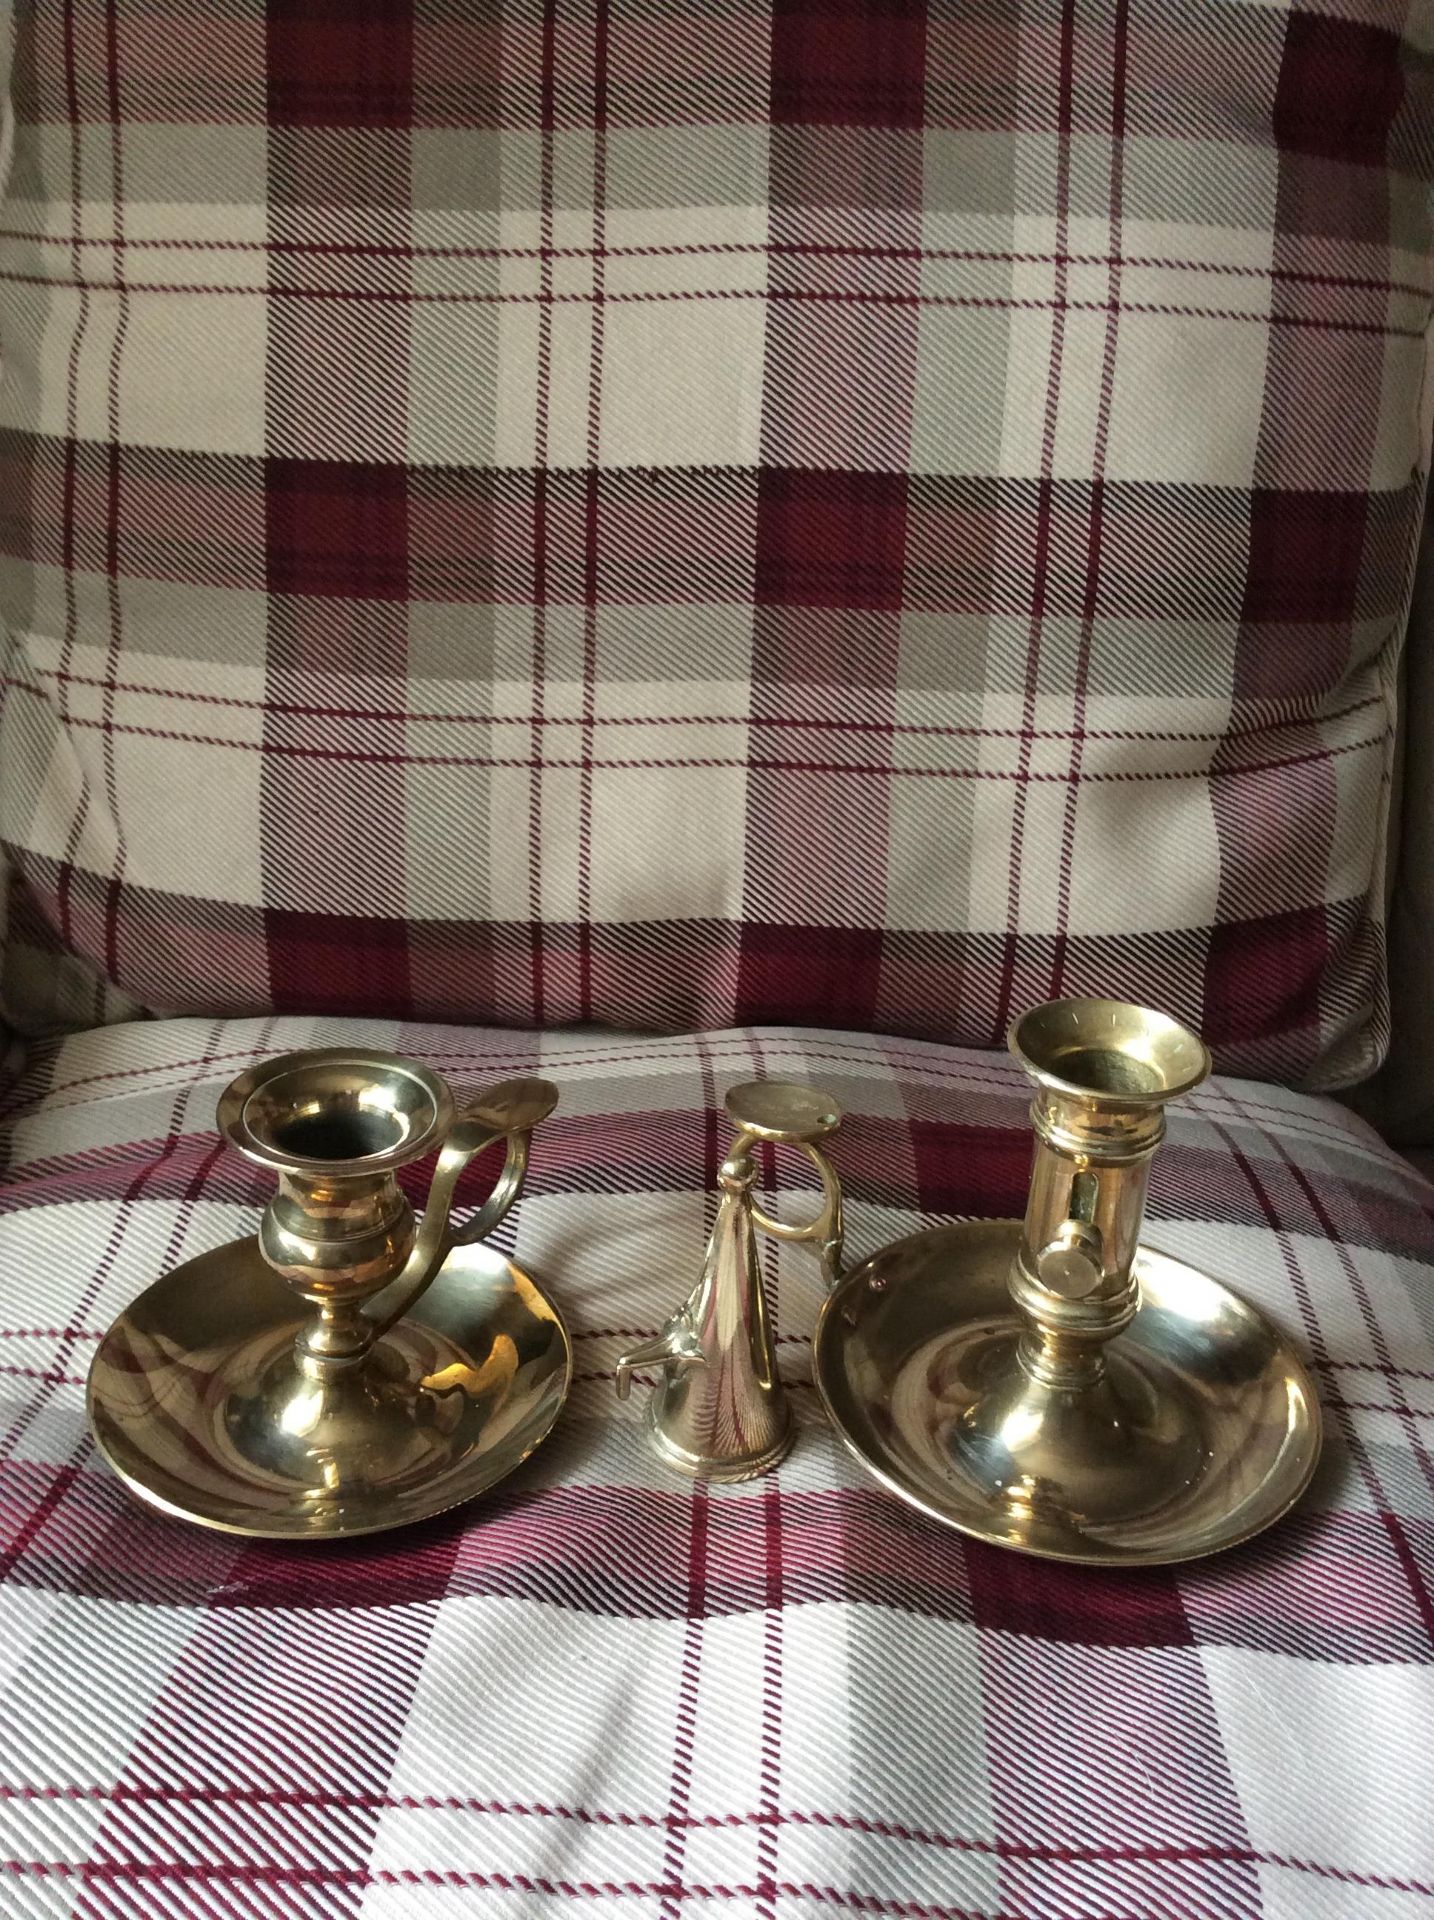 2 Vinage brass candlesticks one with ejector and snuffer